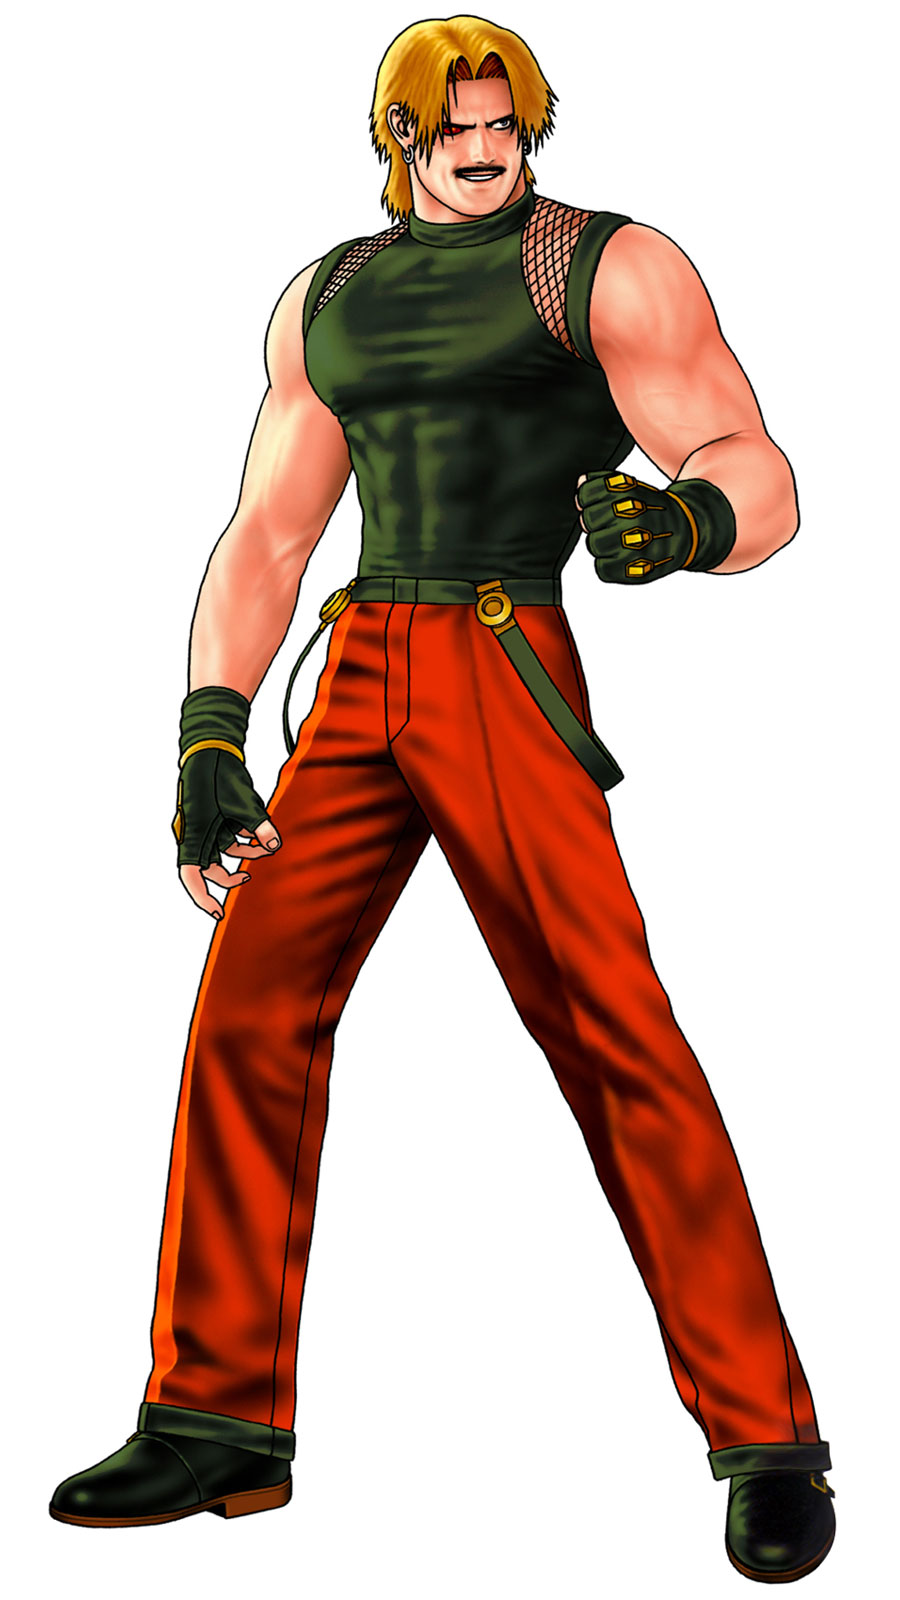 Rugal Bernstein (The King of Fighters)